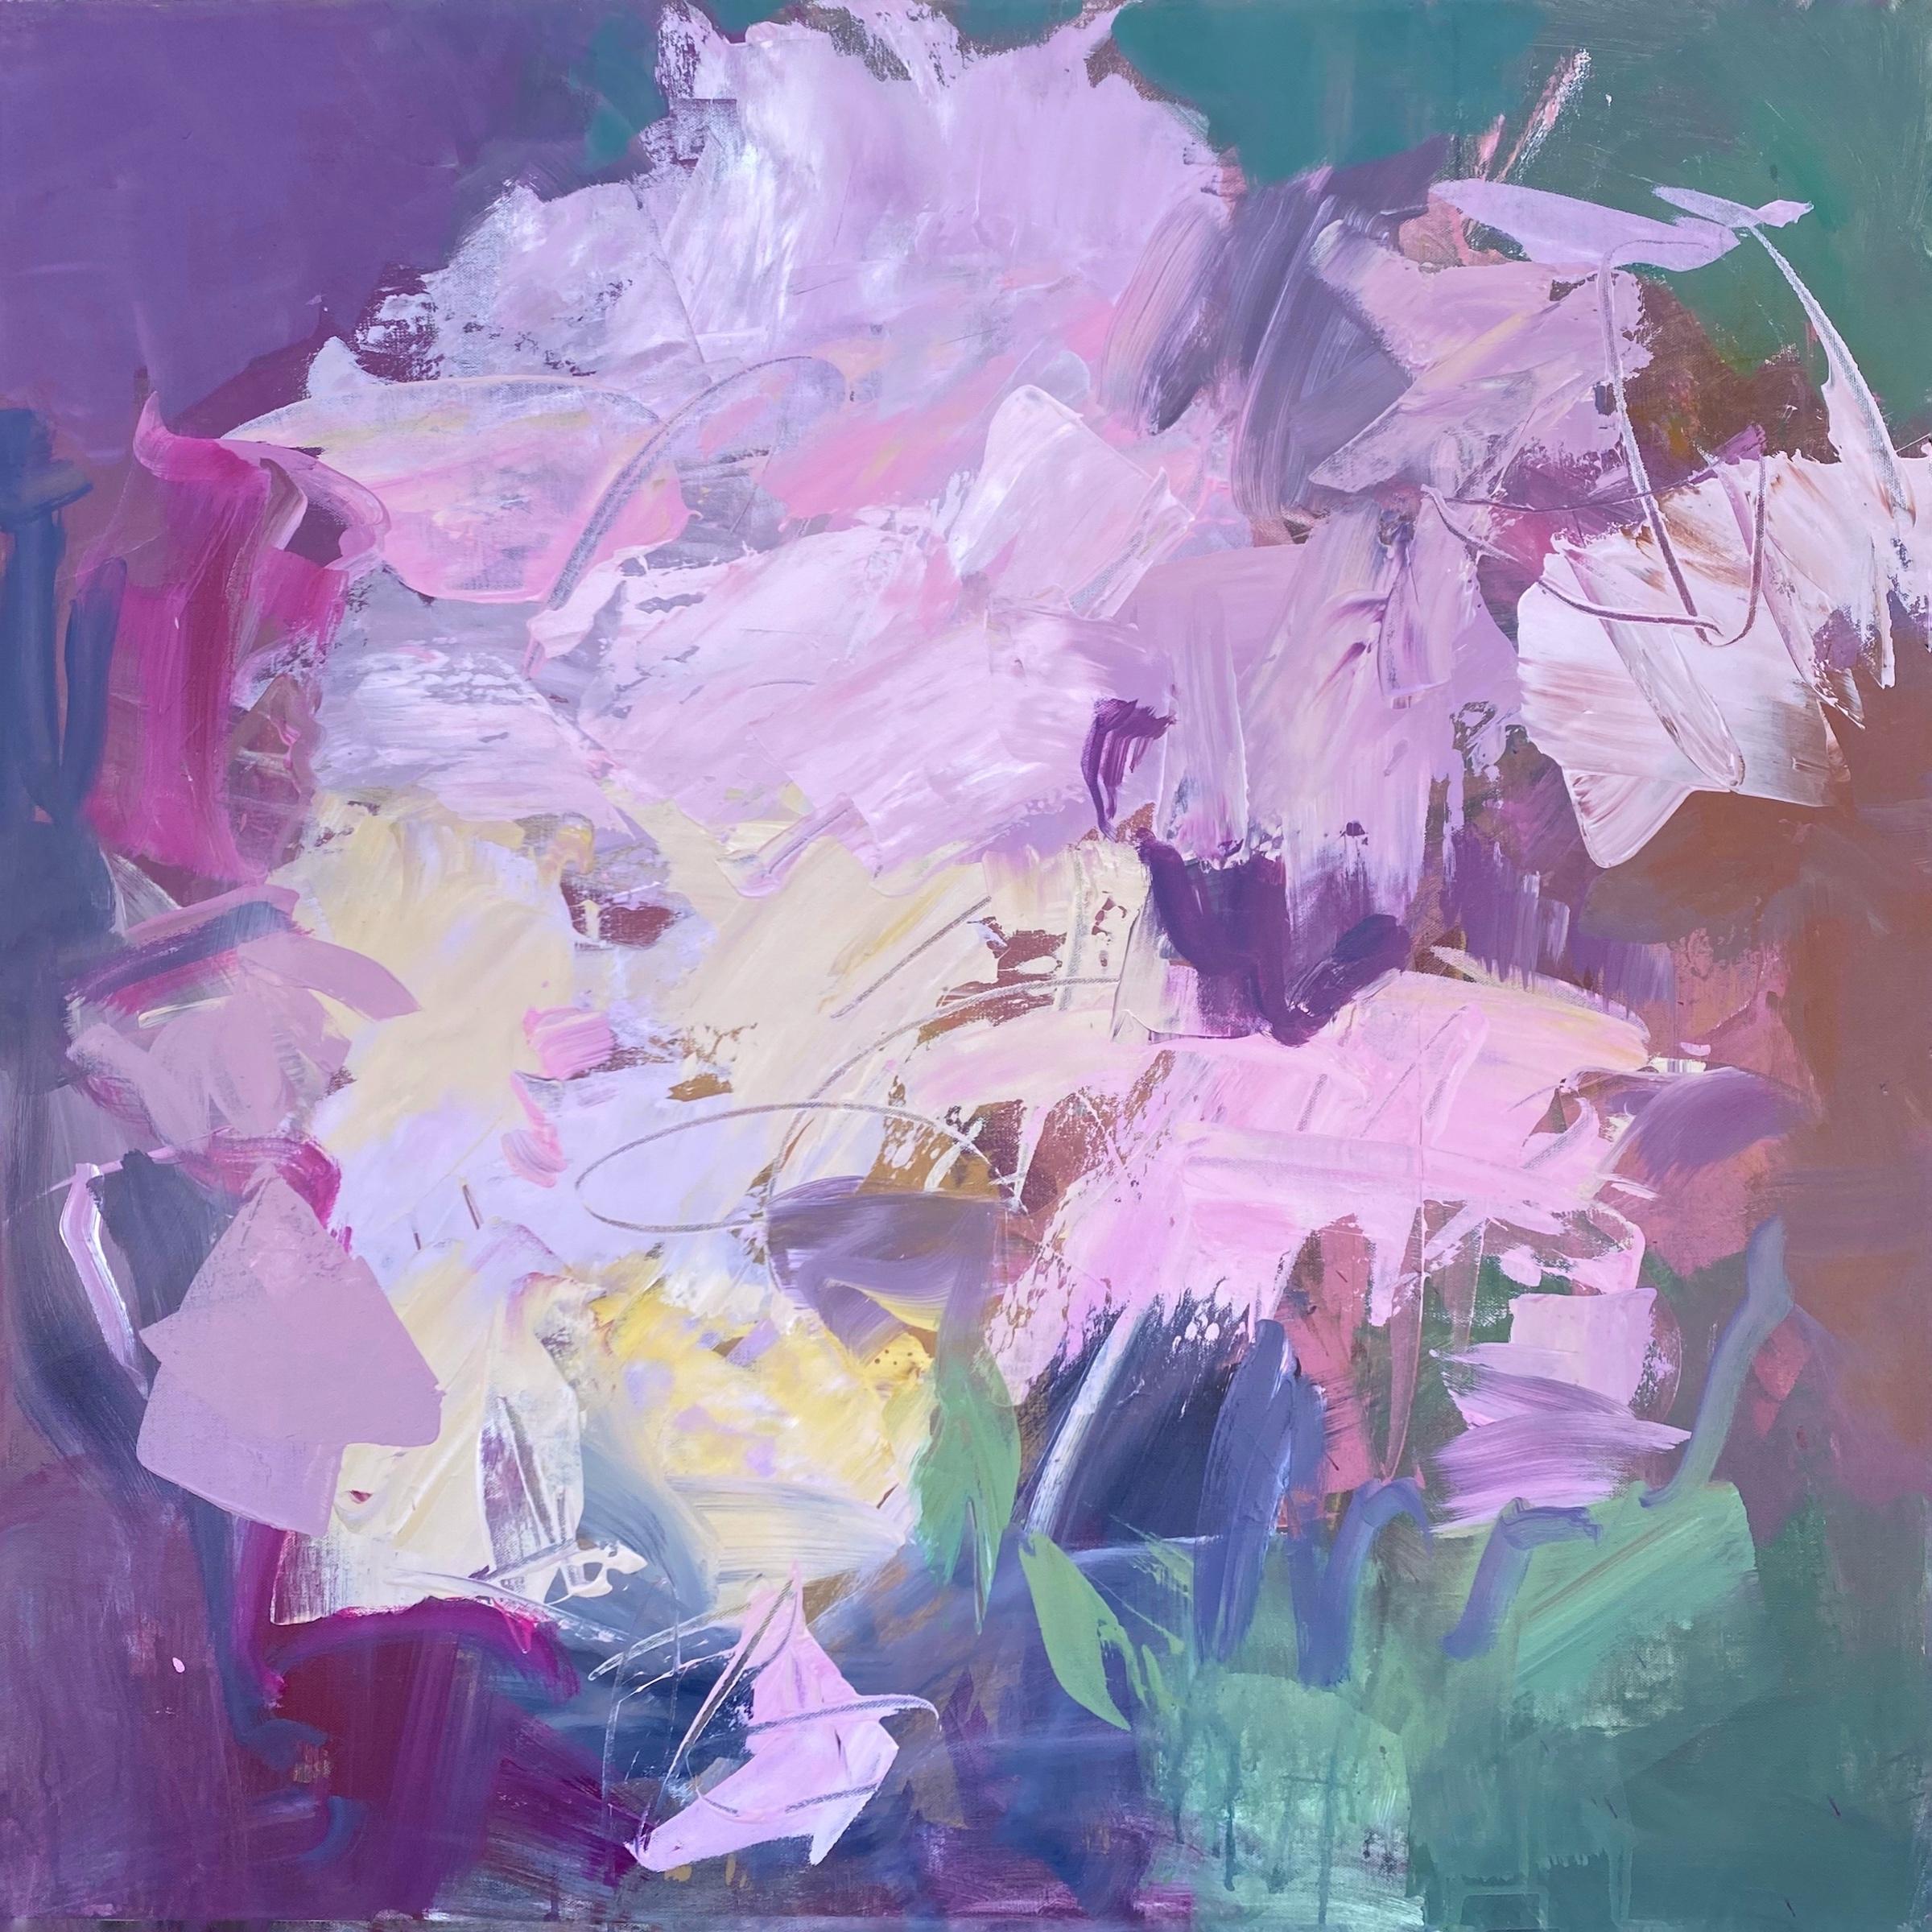 Abstracted blooms make a statement.

Michelle Marra, artist, abstract paintings for sale online and in our contemporary art gallery. I see in swaths of color, texture and light. I am inspired by the lyrical movement and biomorphic forms in luscious,